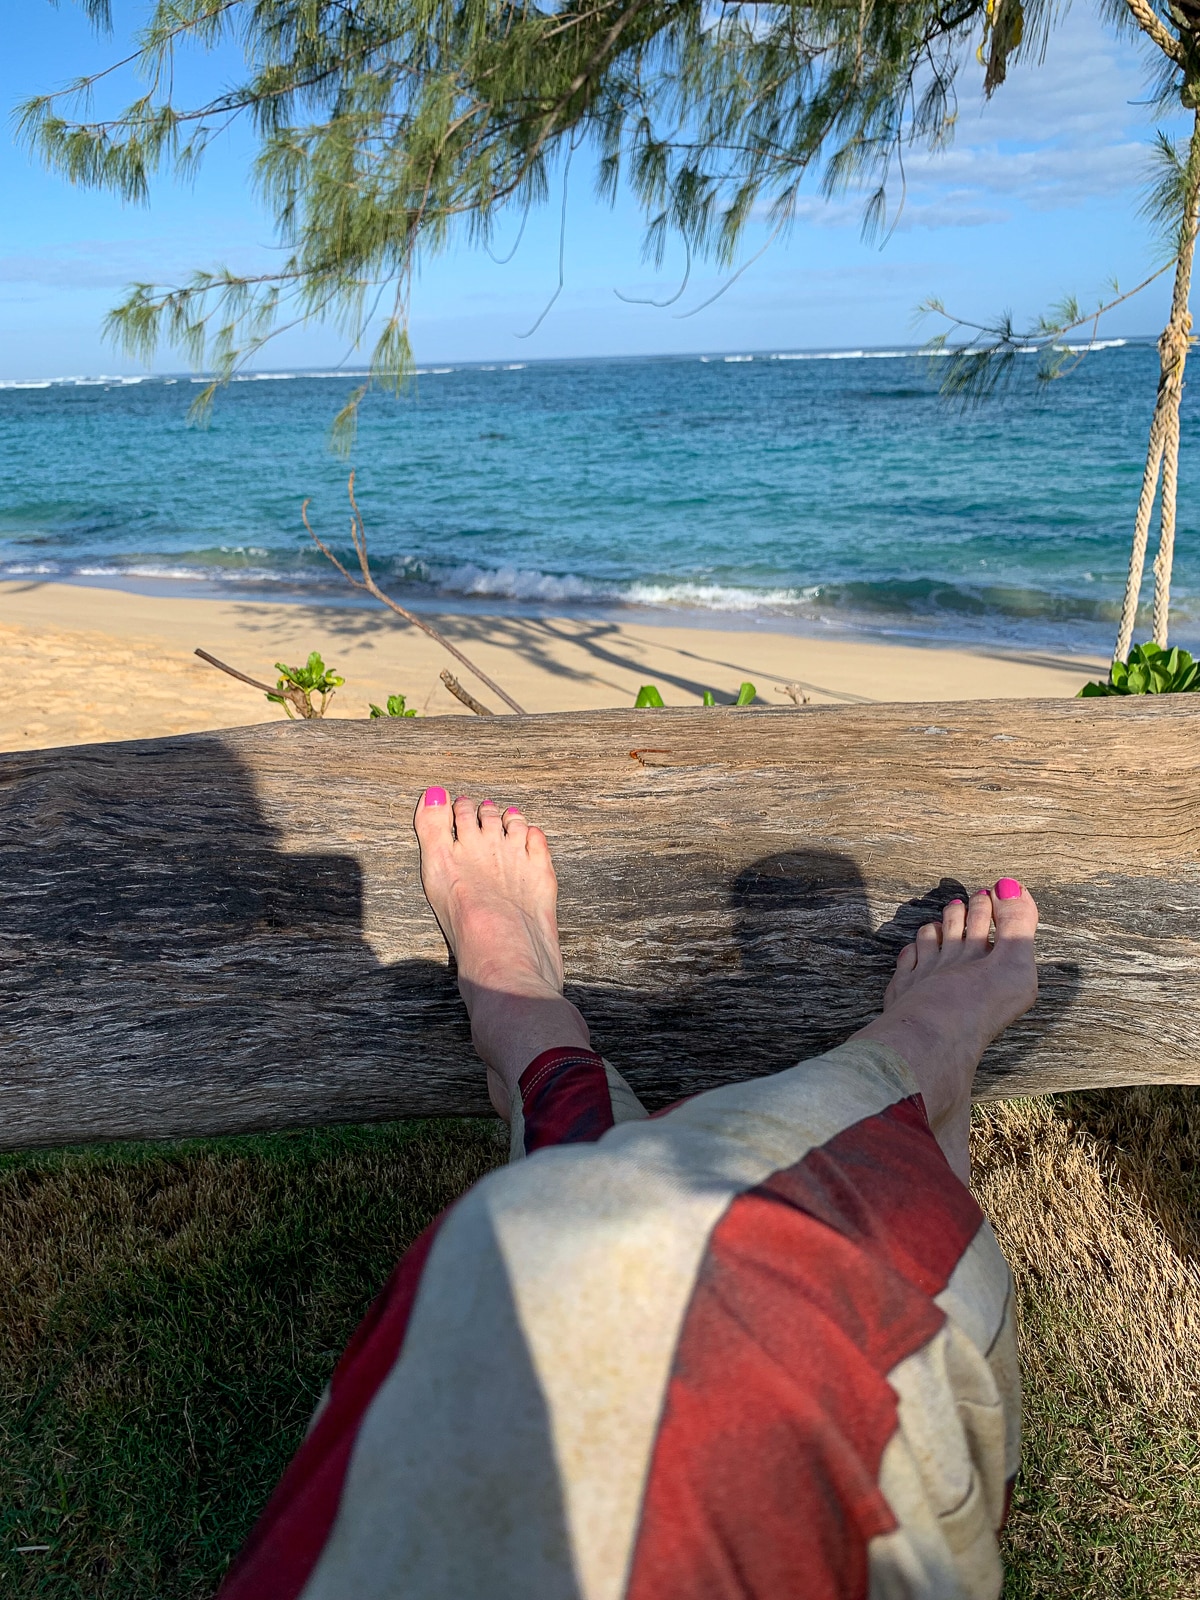 My feet resting on a log by the ocean.